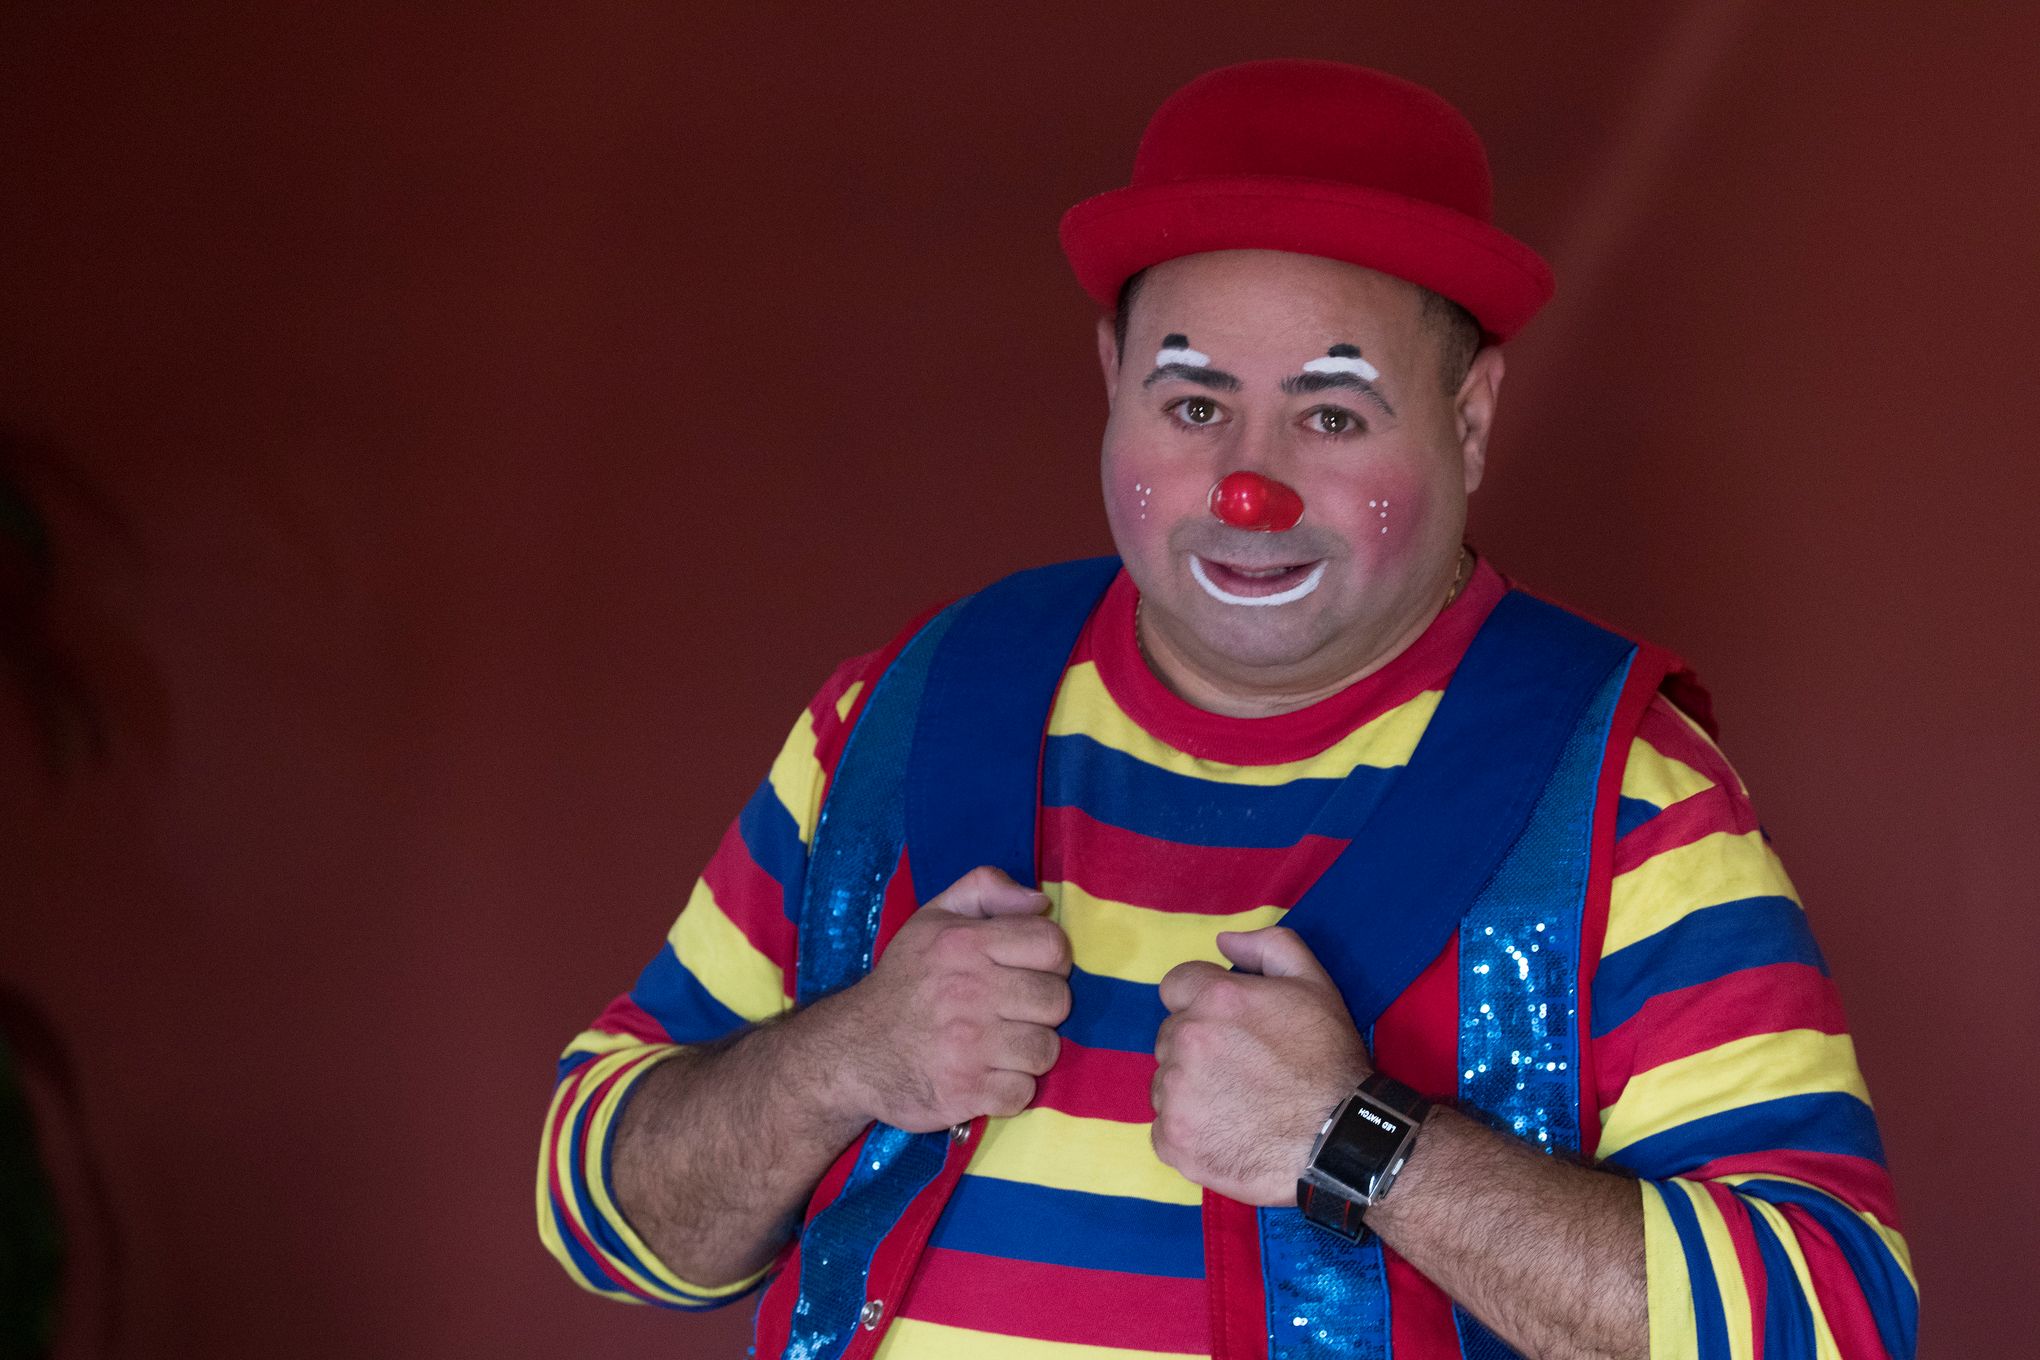 Can you help with my clown look? : r/clowns